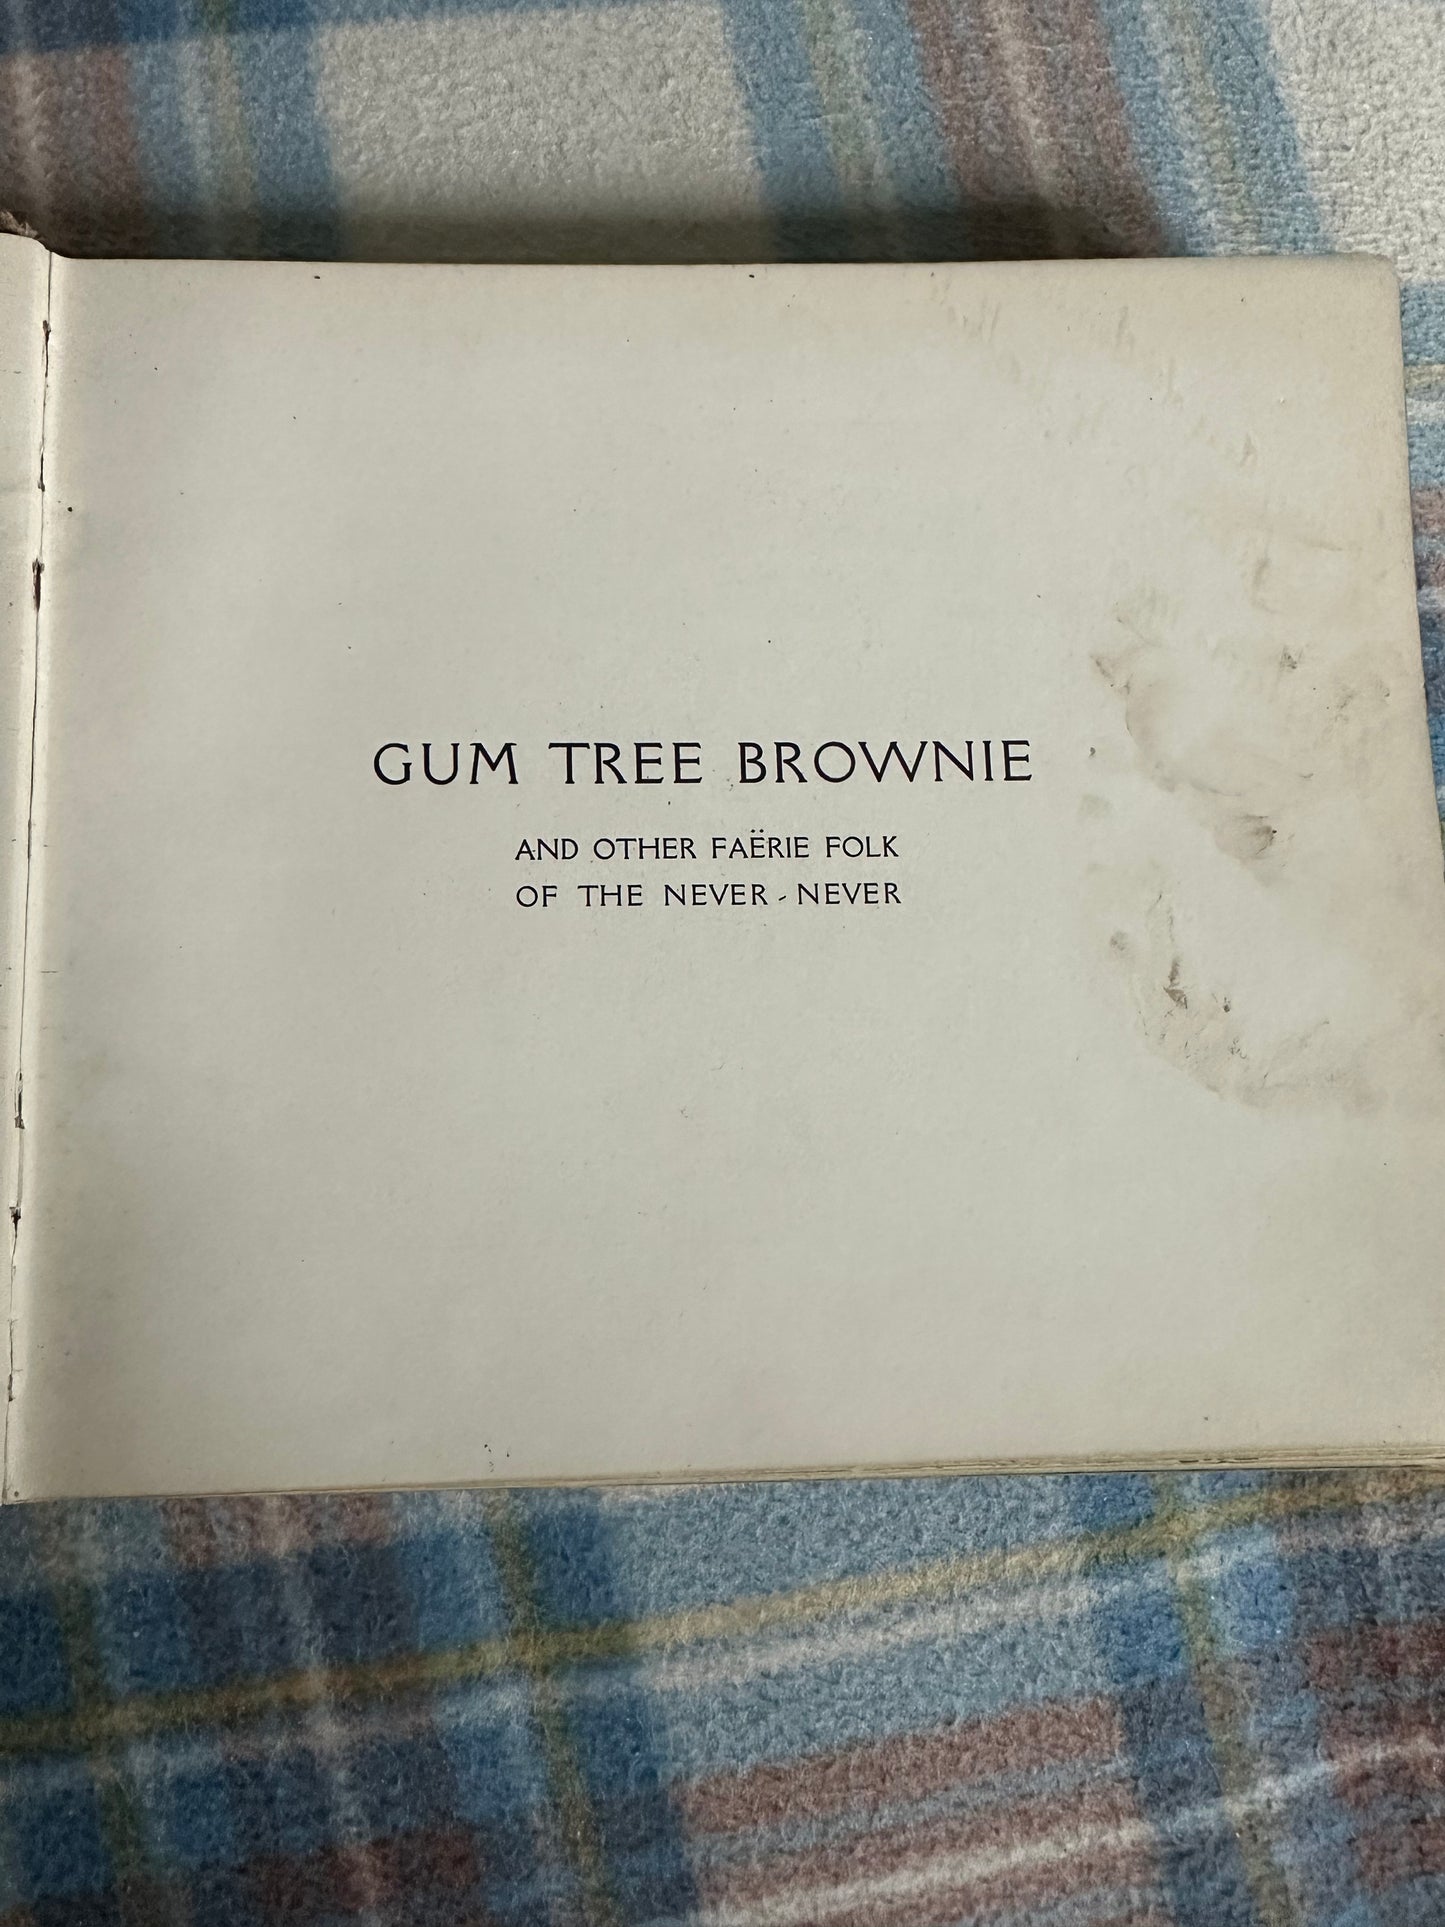 1907*1st* Gum Tree Brownie & Other Faërie Folk Of The Never Never - Tarella Quin(Ida S. Rentoul(Outhwaite) George Robertson & Co Ltd